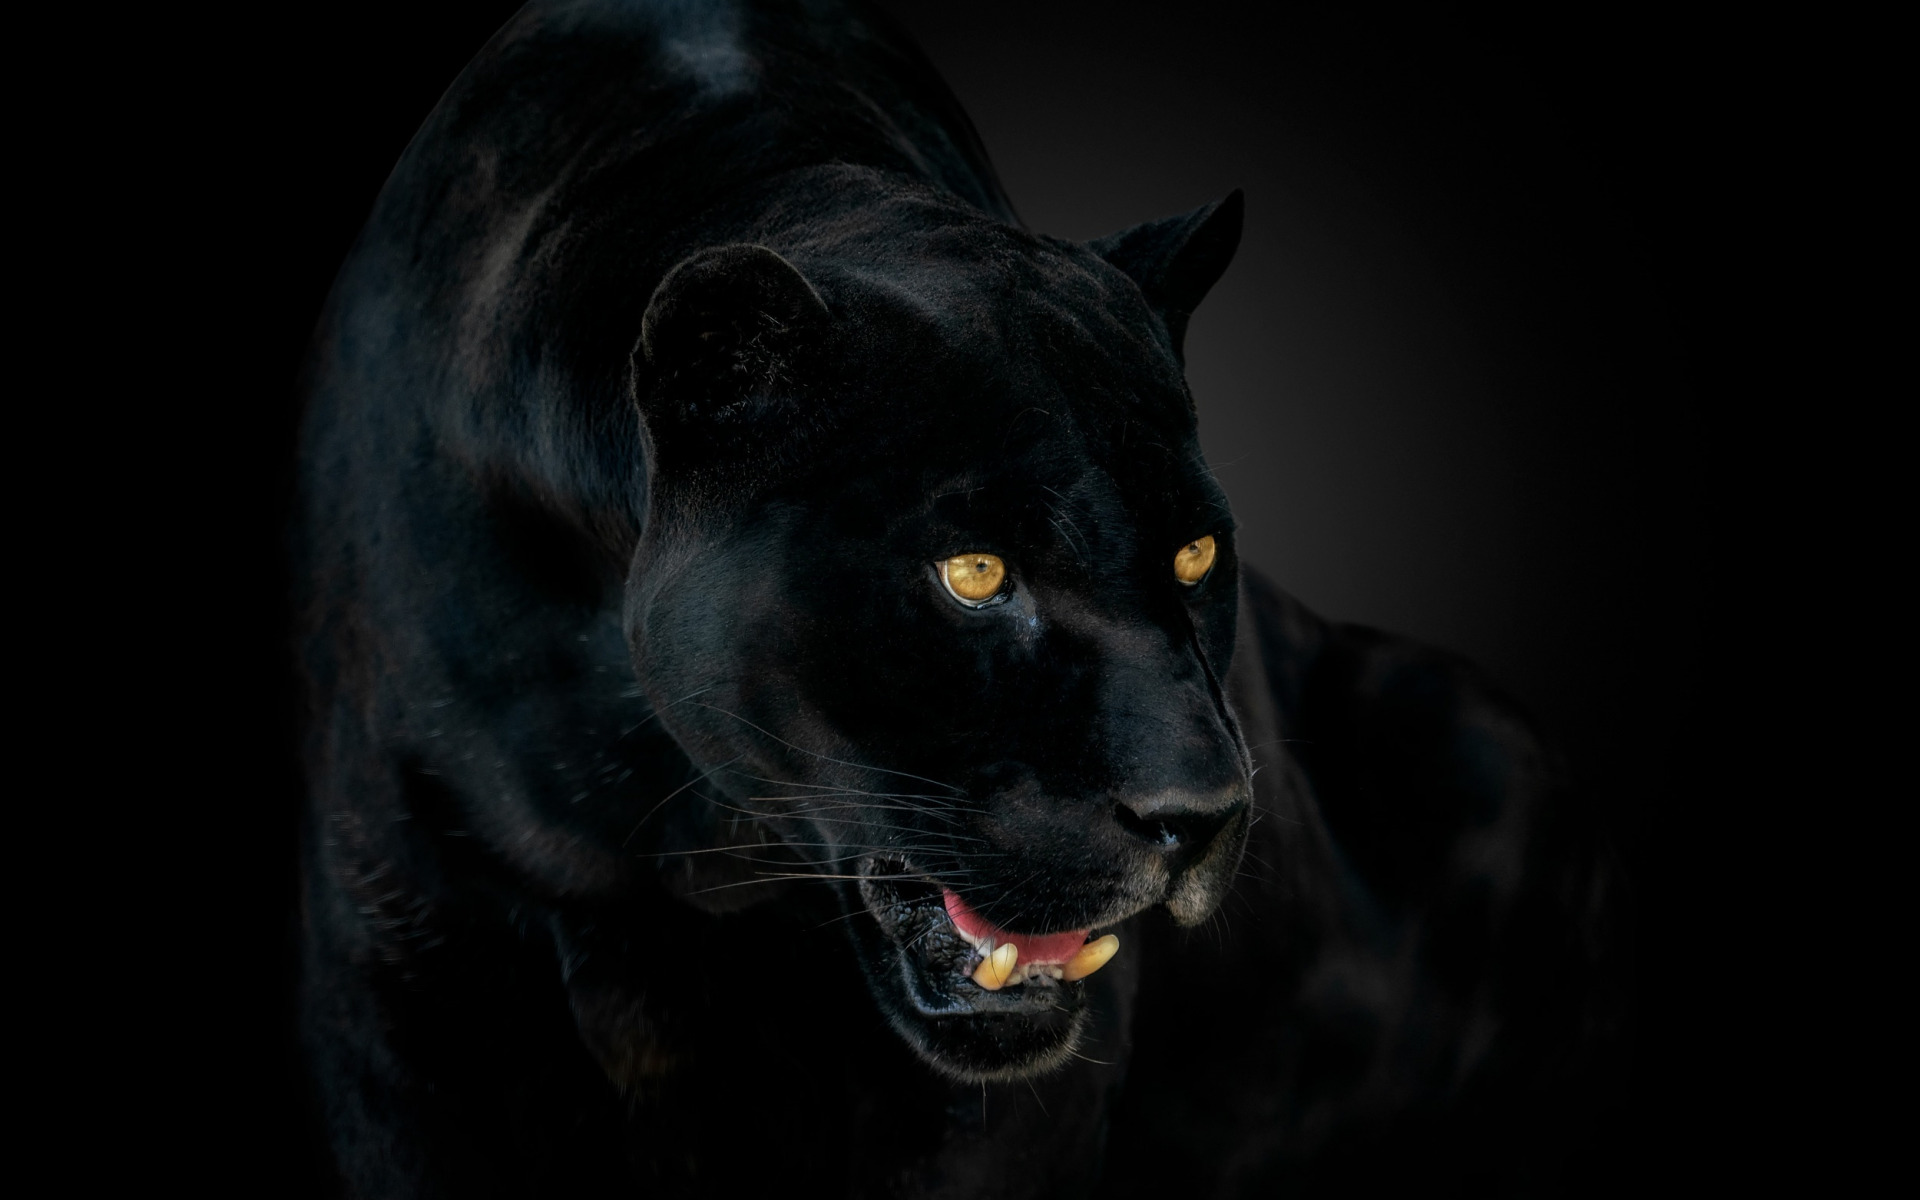 Download wallpaper panther, black jaguar, wild cat, black panther, dangerous animals, panther on a black background for desktop with resolution 1920x1200. High Quality HD picture wallpaper